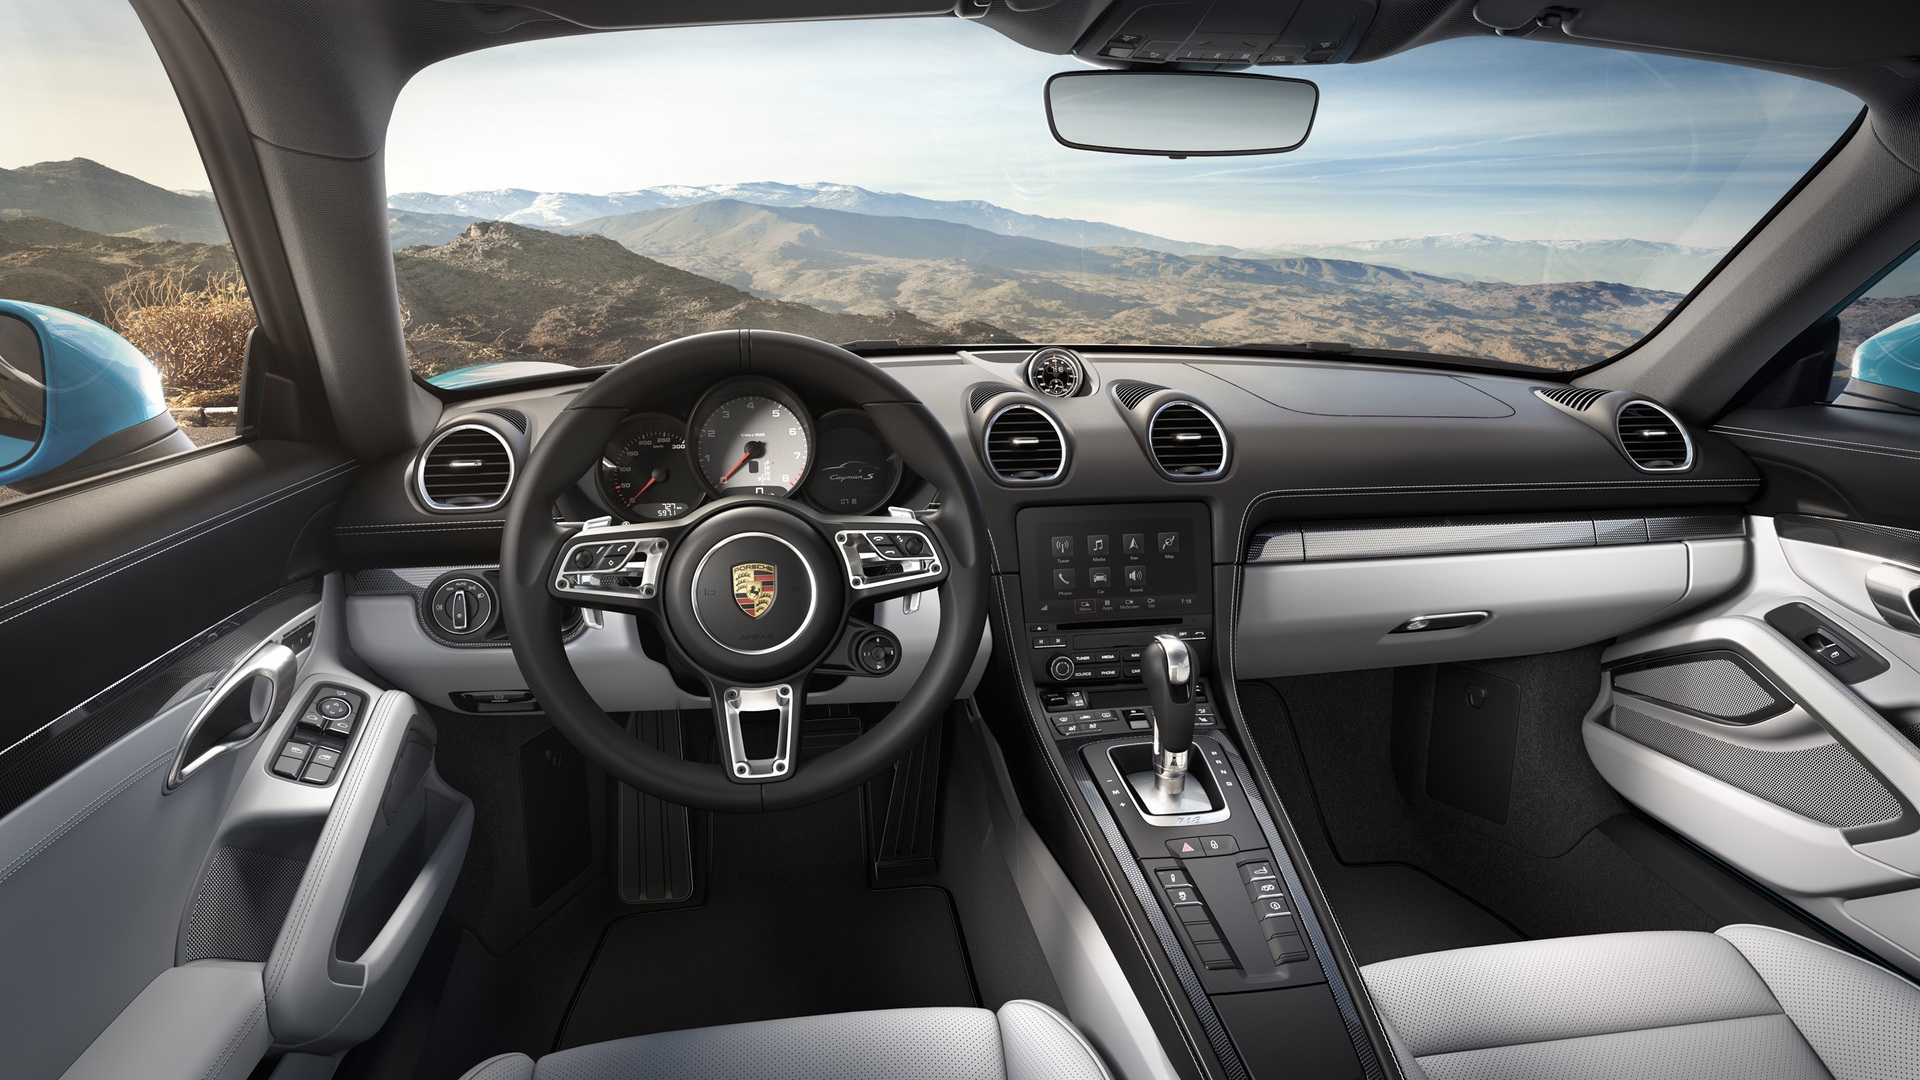 The Porsche 718 Cayman S interior. A little busier than the Lotus cabin, but still a lovely place to be, with everything slightly tilted towards the driver.